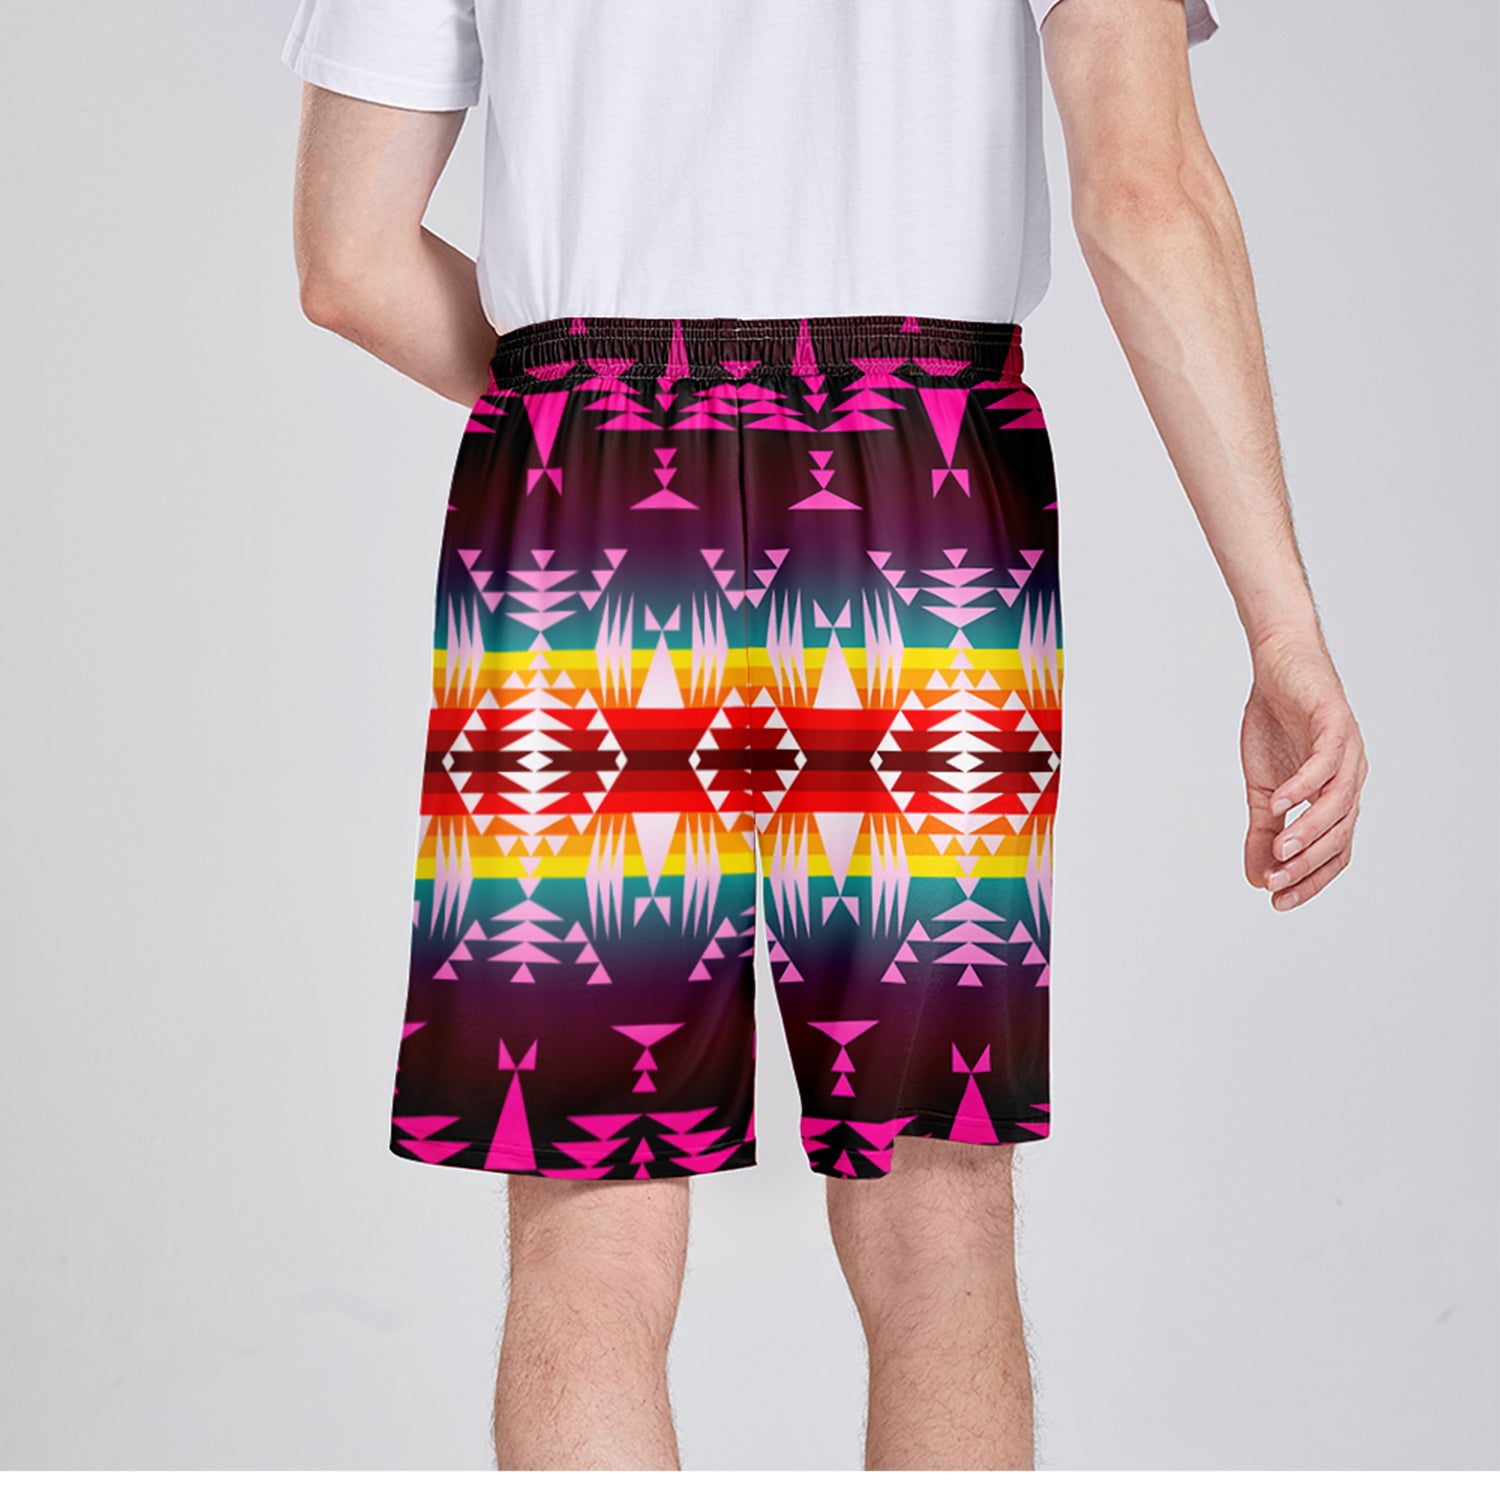 Between the Appalachian Mountains Athletic Shorts with Pockets